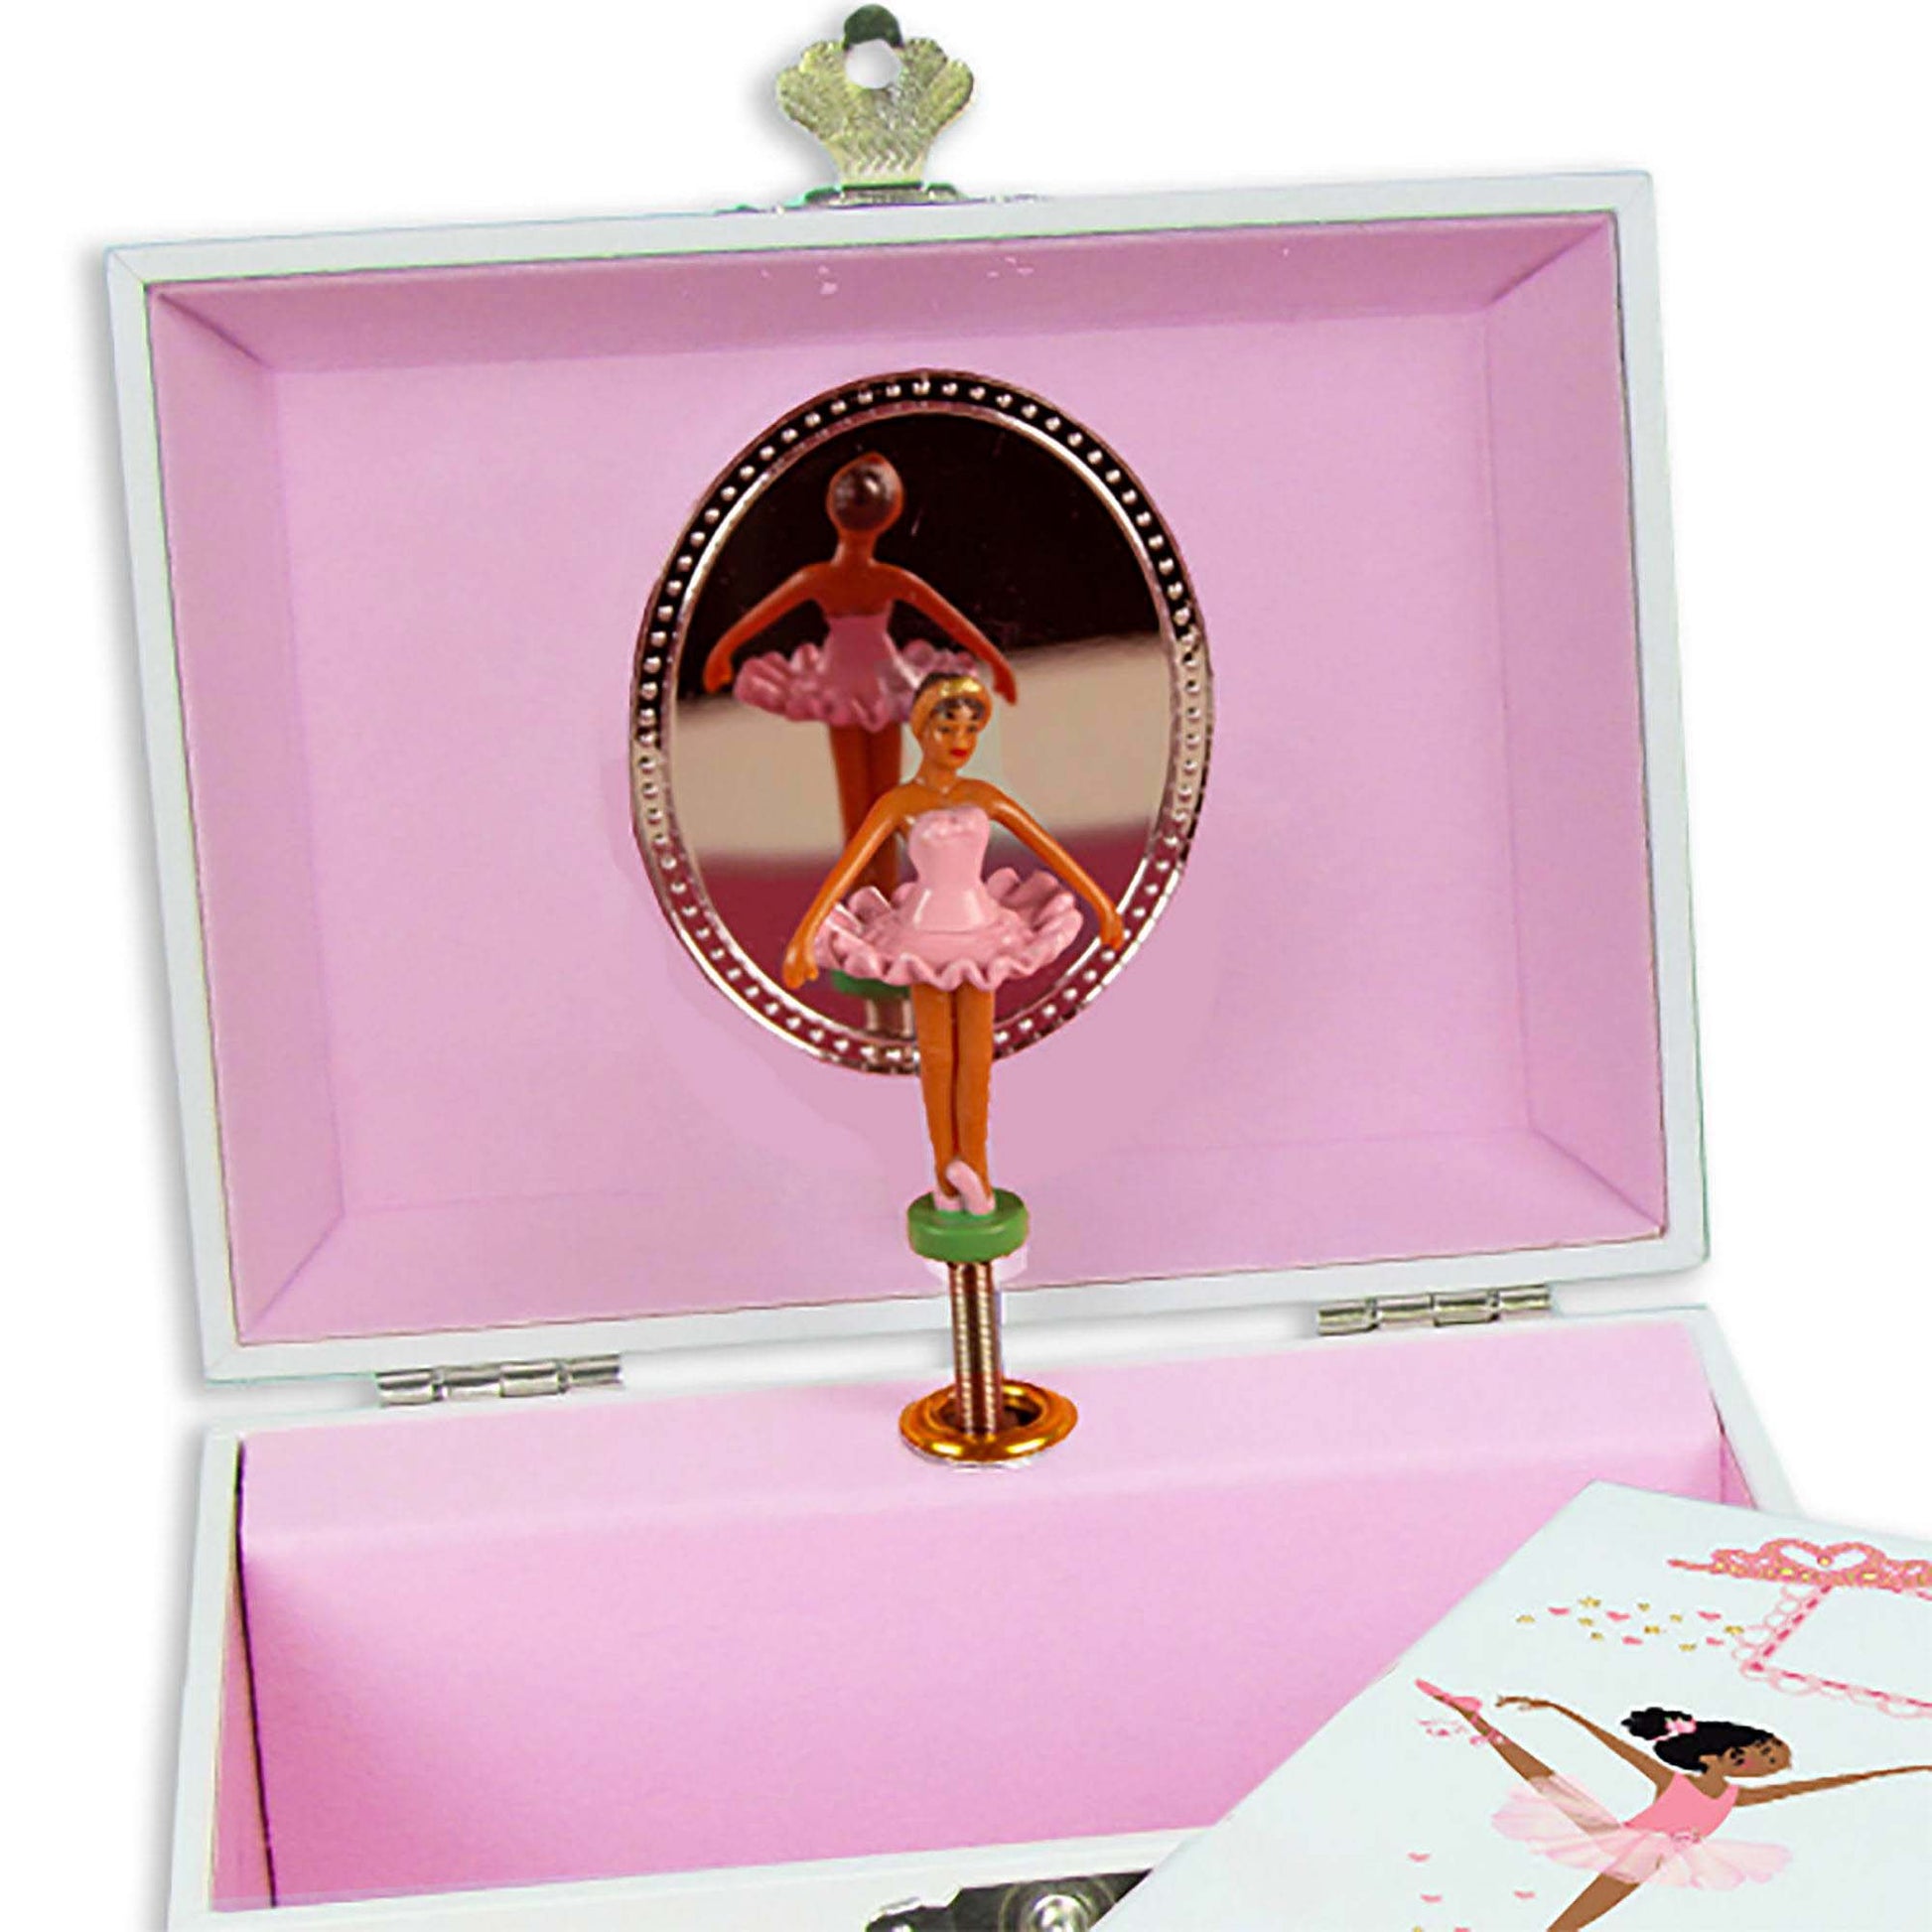 Personalized Ballerina Jewelry Box with French Paris design